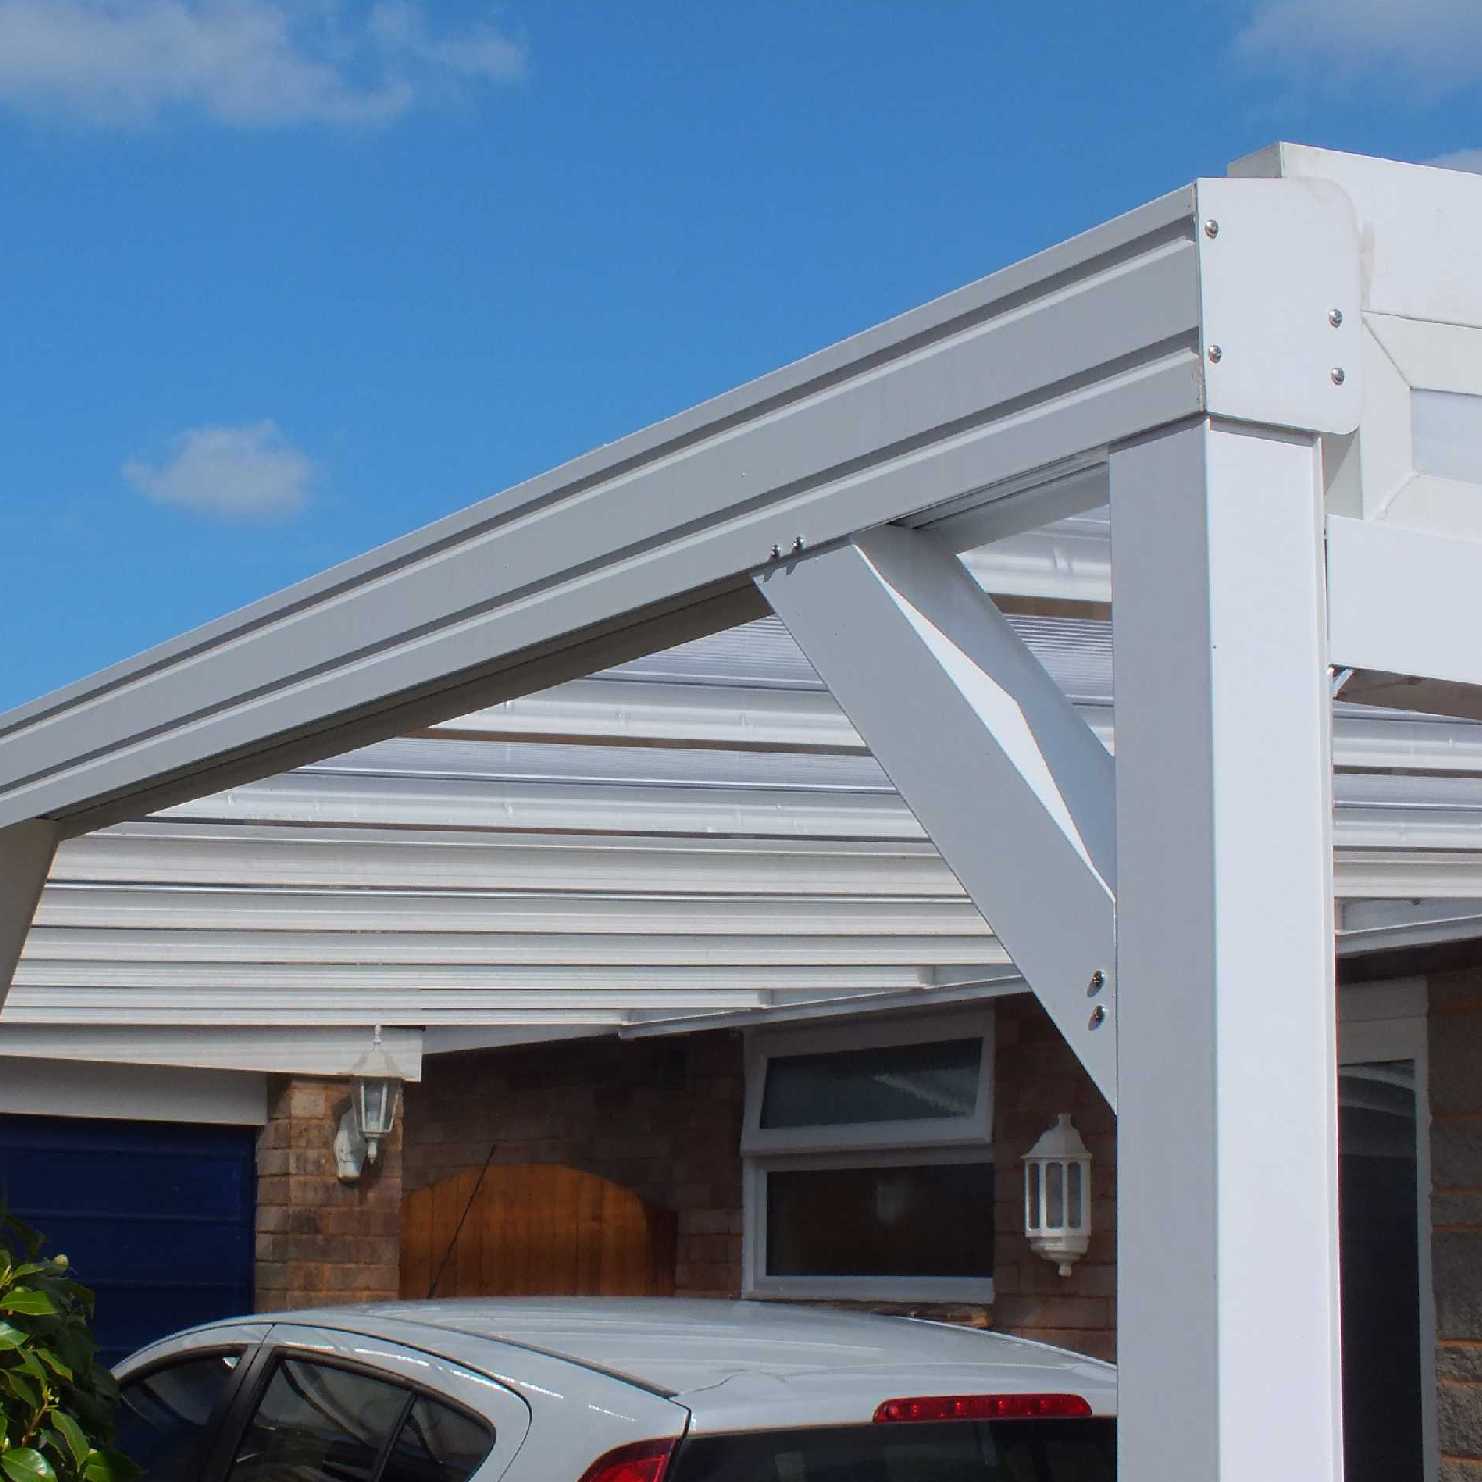 Buy Omega Smart Lean-To Canopy, White with 16mm Polycarbonate Glazing - 9.1m (W) x 4.5m (P), (5) Supporting Posts online today